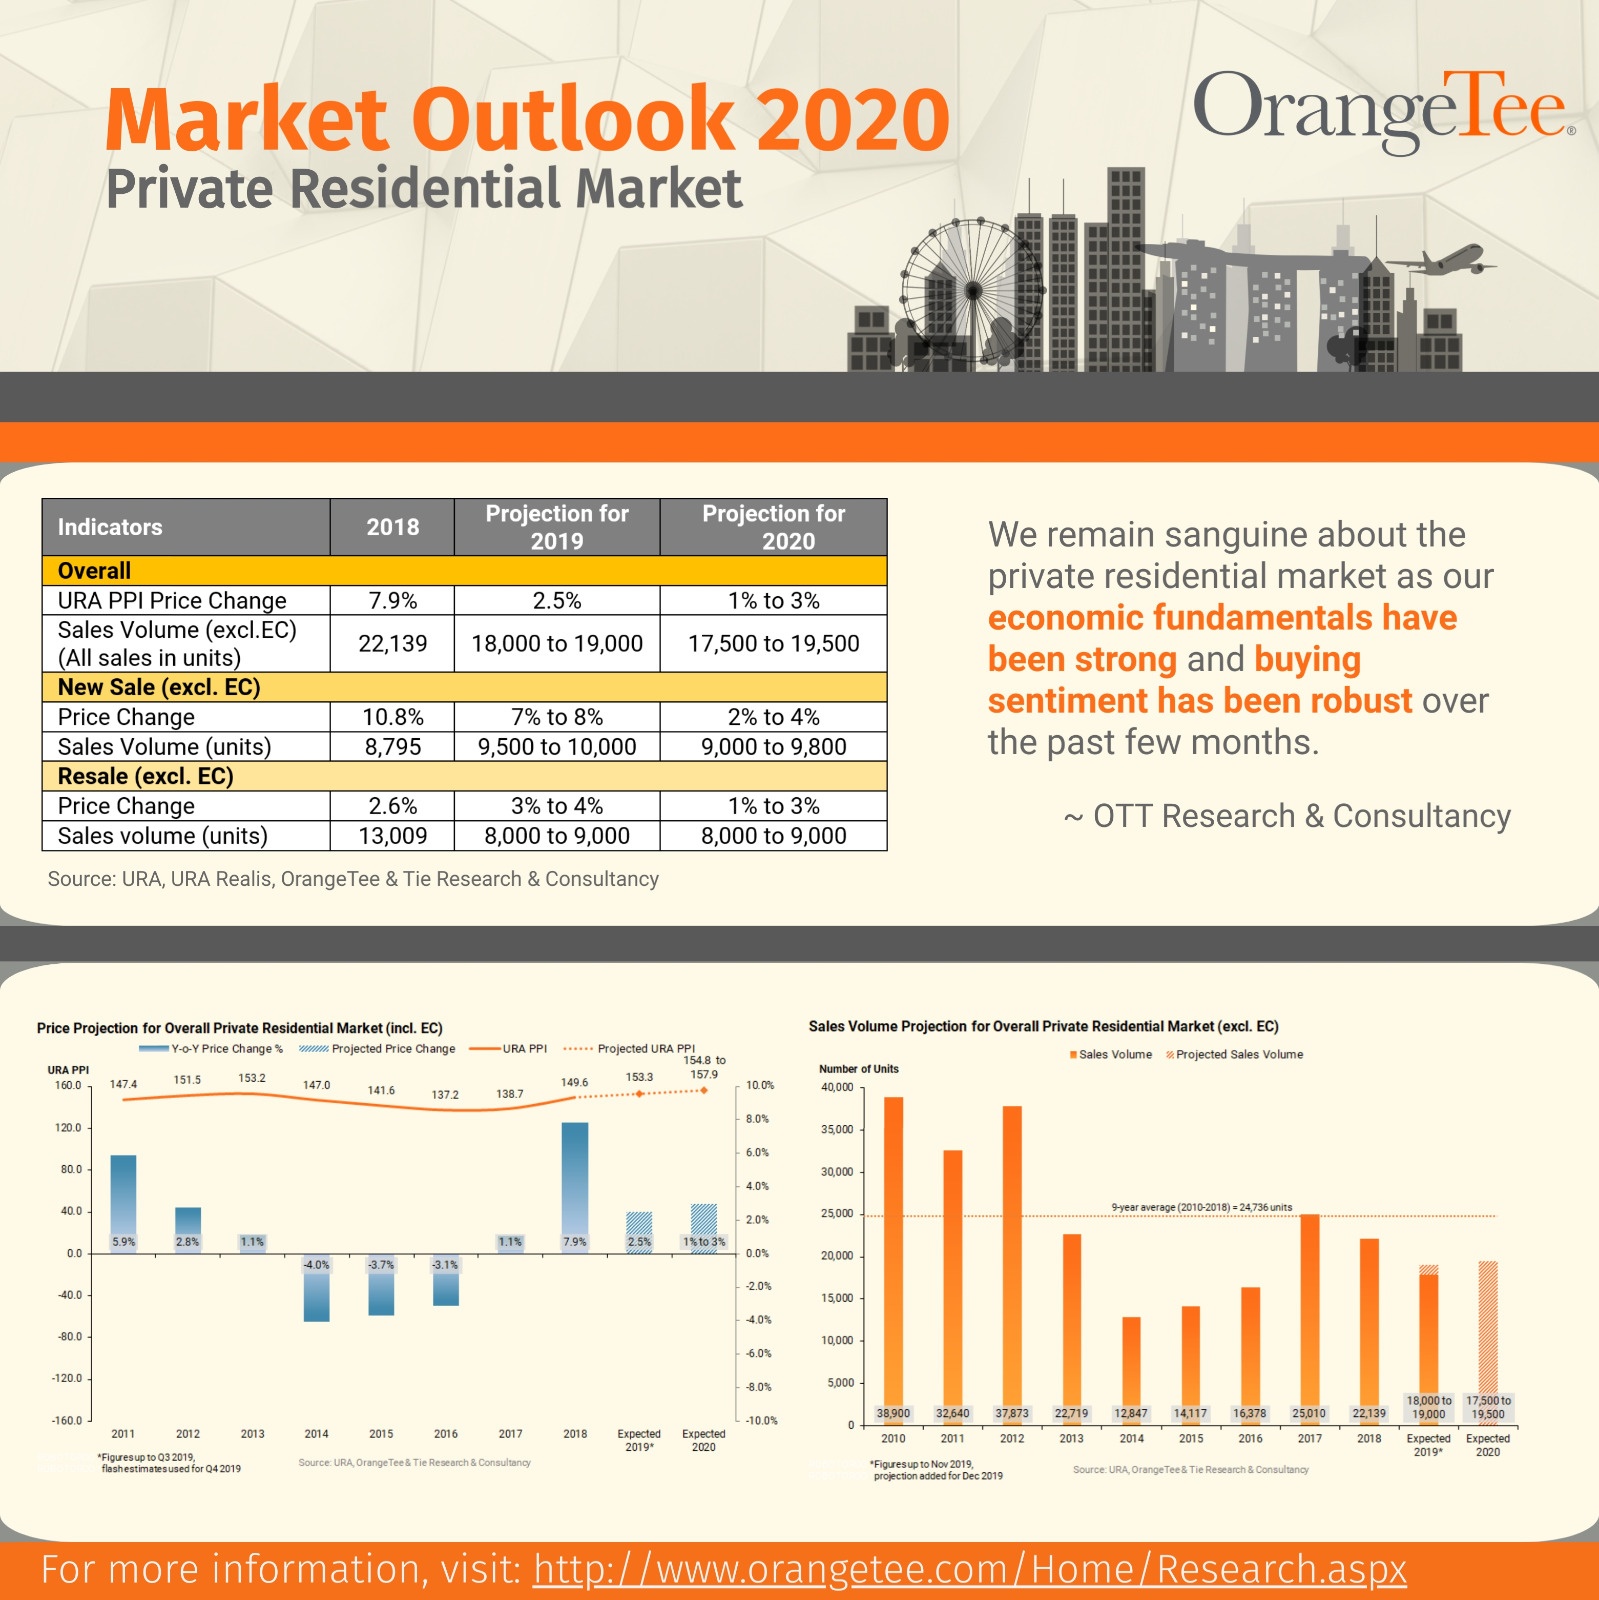 PRIVATE RESIDENTIAL MARKET OUTLOOK 2020 (Singapore)